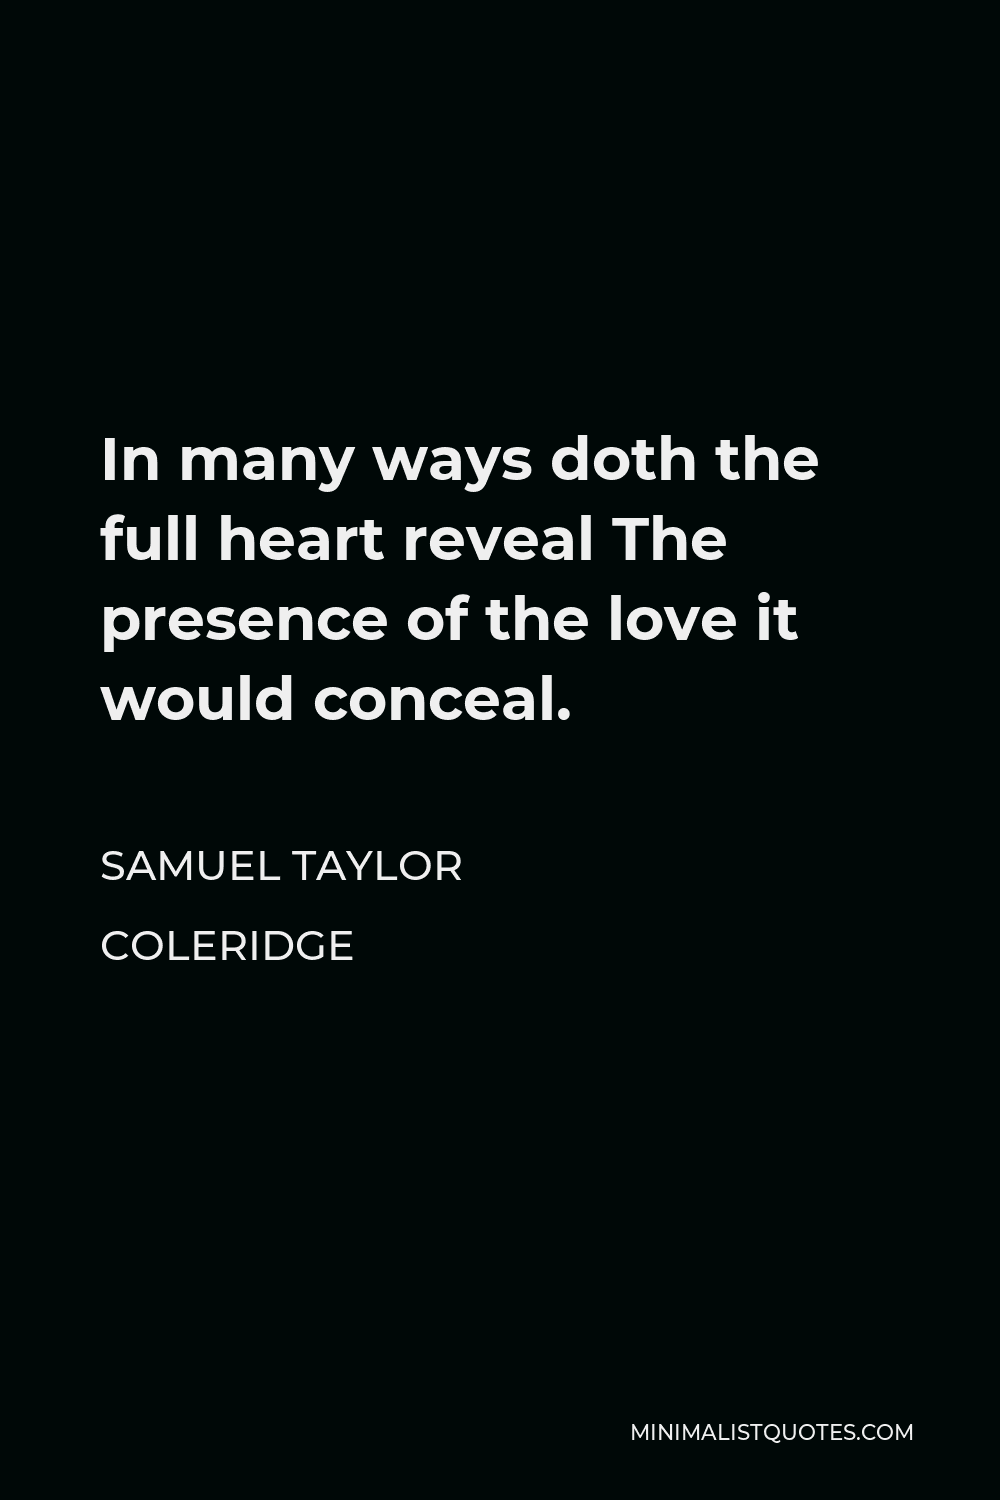 Samuel Taylor Coleridge Quote - In many ways doth the full heart reveal The presence of the love it would conceal.